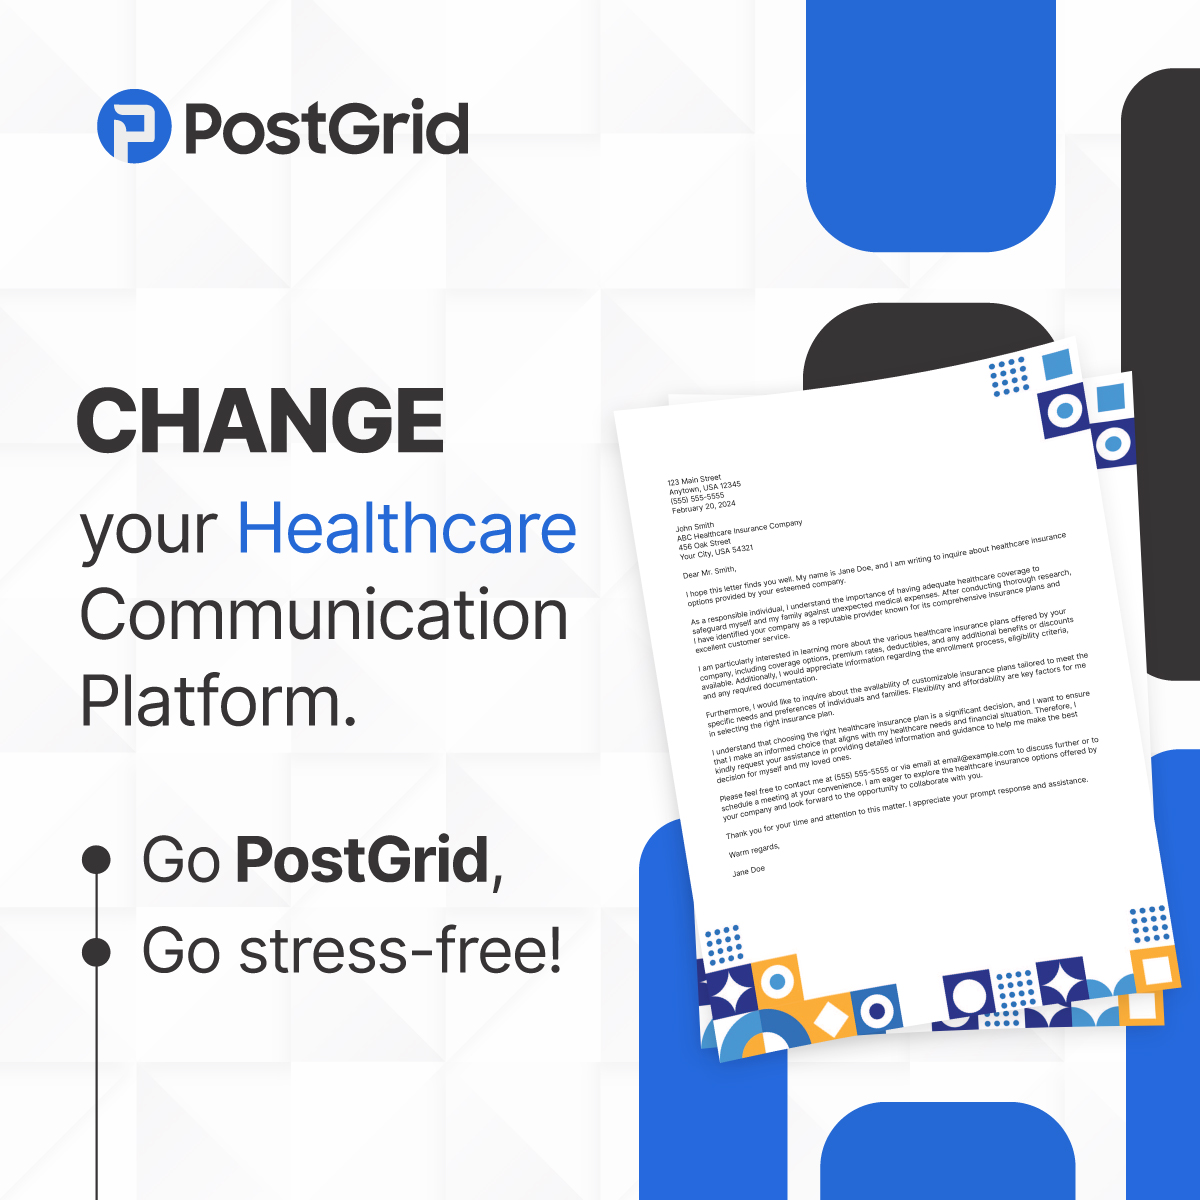 Safeguard personal and sensitive information from data breach threats with an additional layer of PostGrid's enhanced compliance and security measures.

#HealthcareCommunication #DirectMail #OfflineCommunication #securitythreat